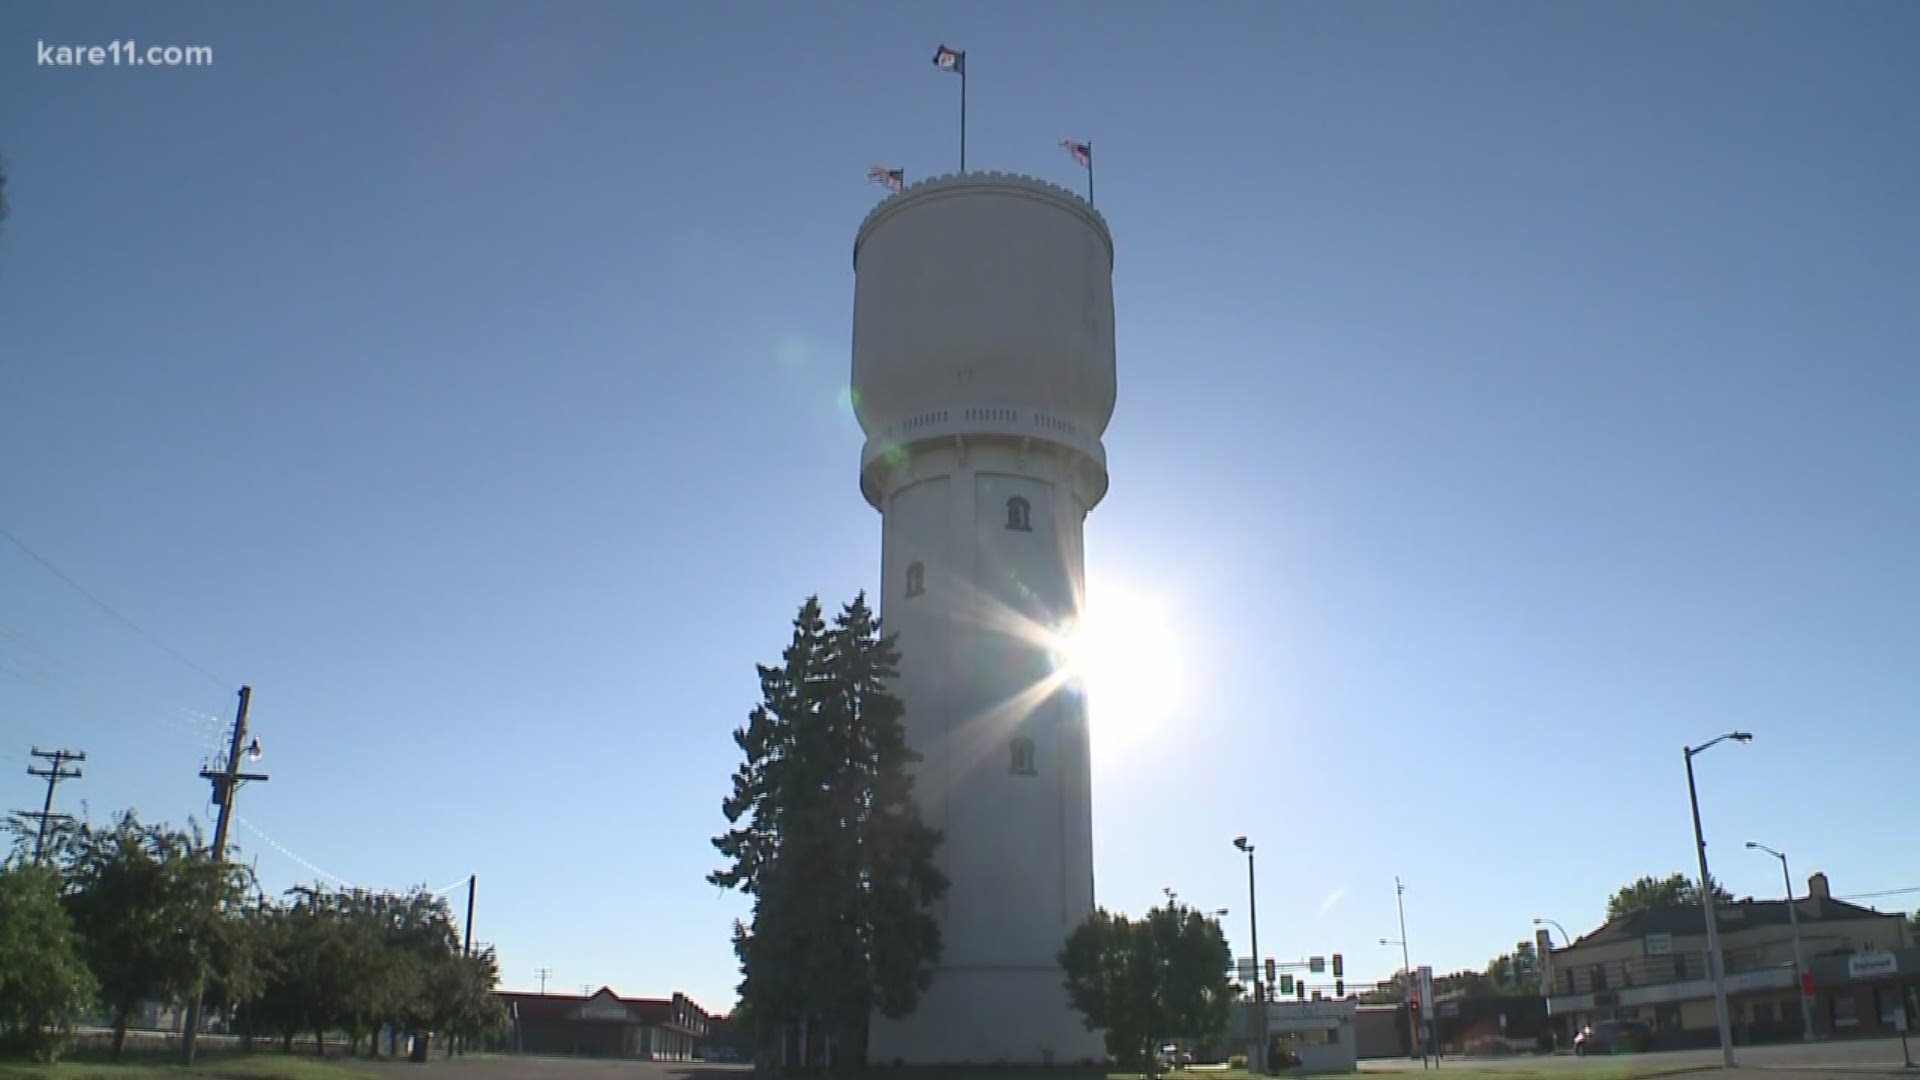 Should it stay or should it go? That's the growing debate in Brainerd over the old water tower. Renovating it in order to keep it standing would cost millions of dollars. And getting rid of it would cost just a fraction of that.